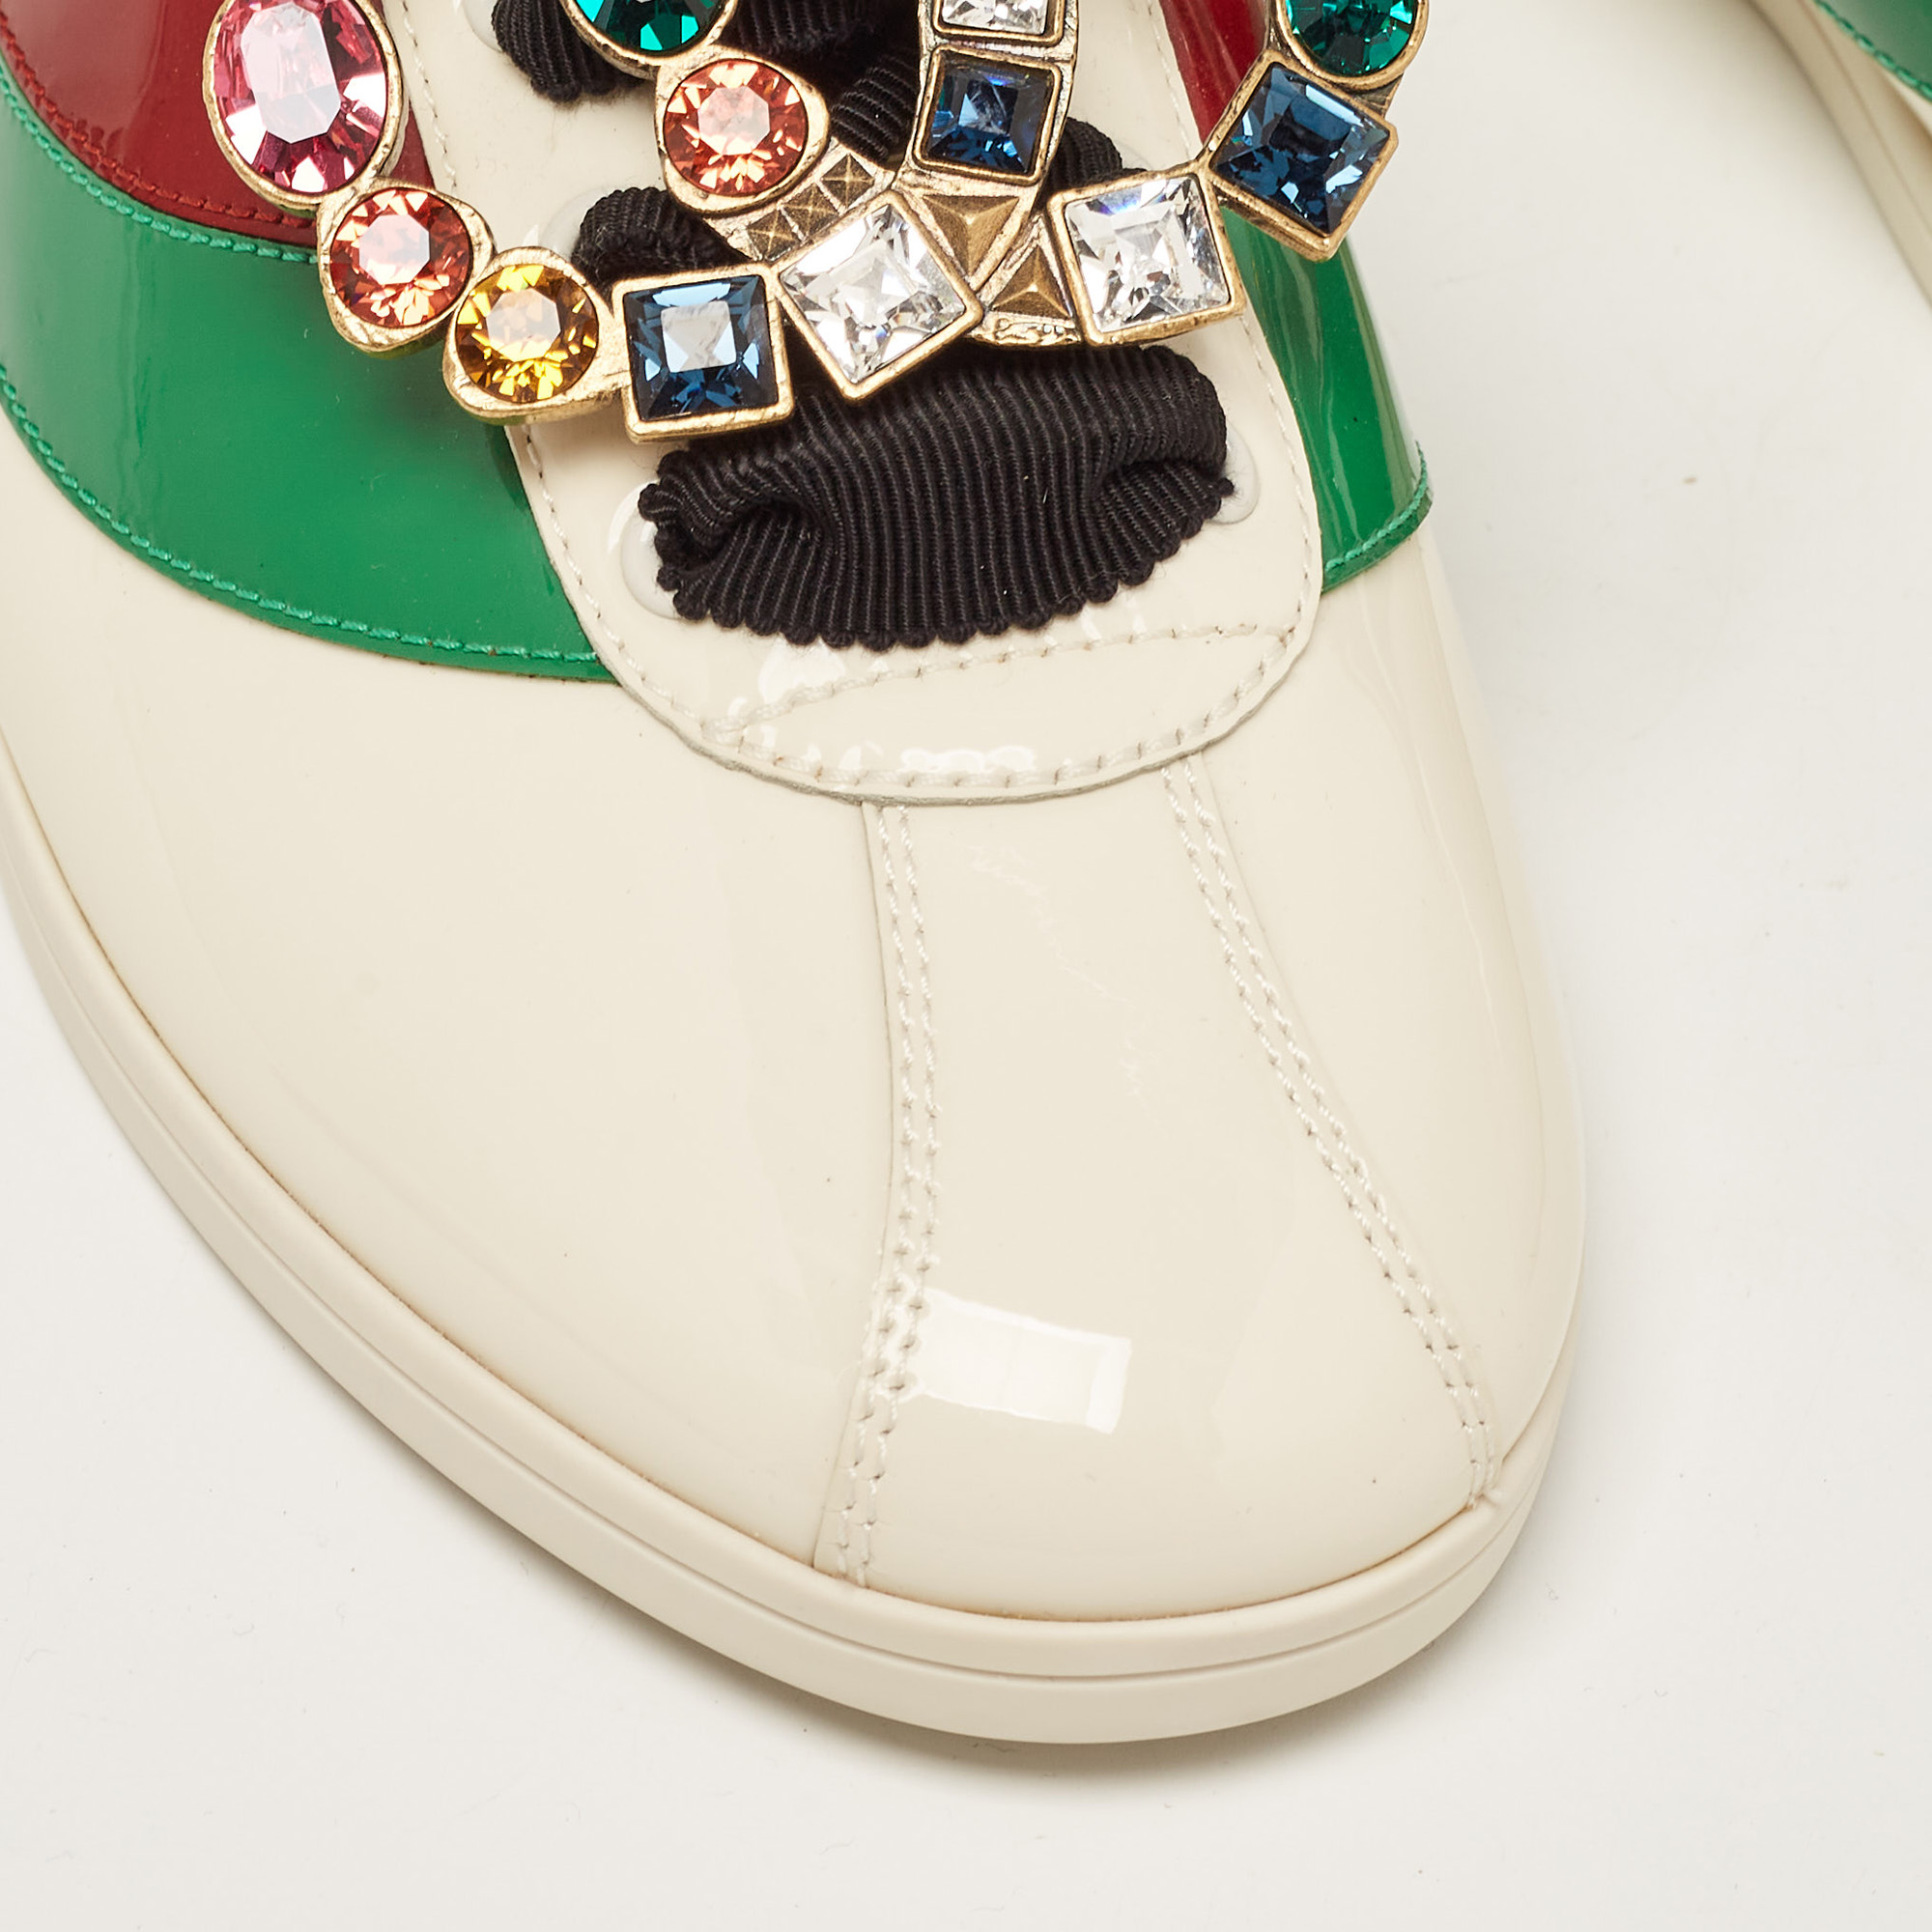 Gucci Tricolor Patent Falacer Crystal Embellished Low Top  Sneakers Size 38